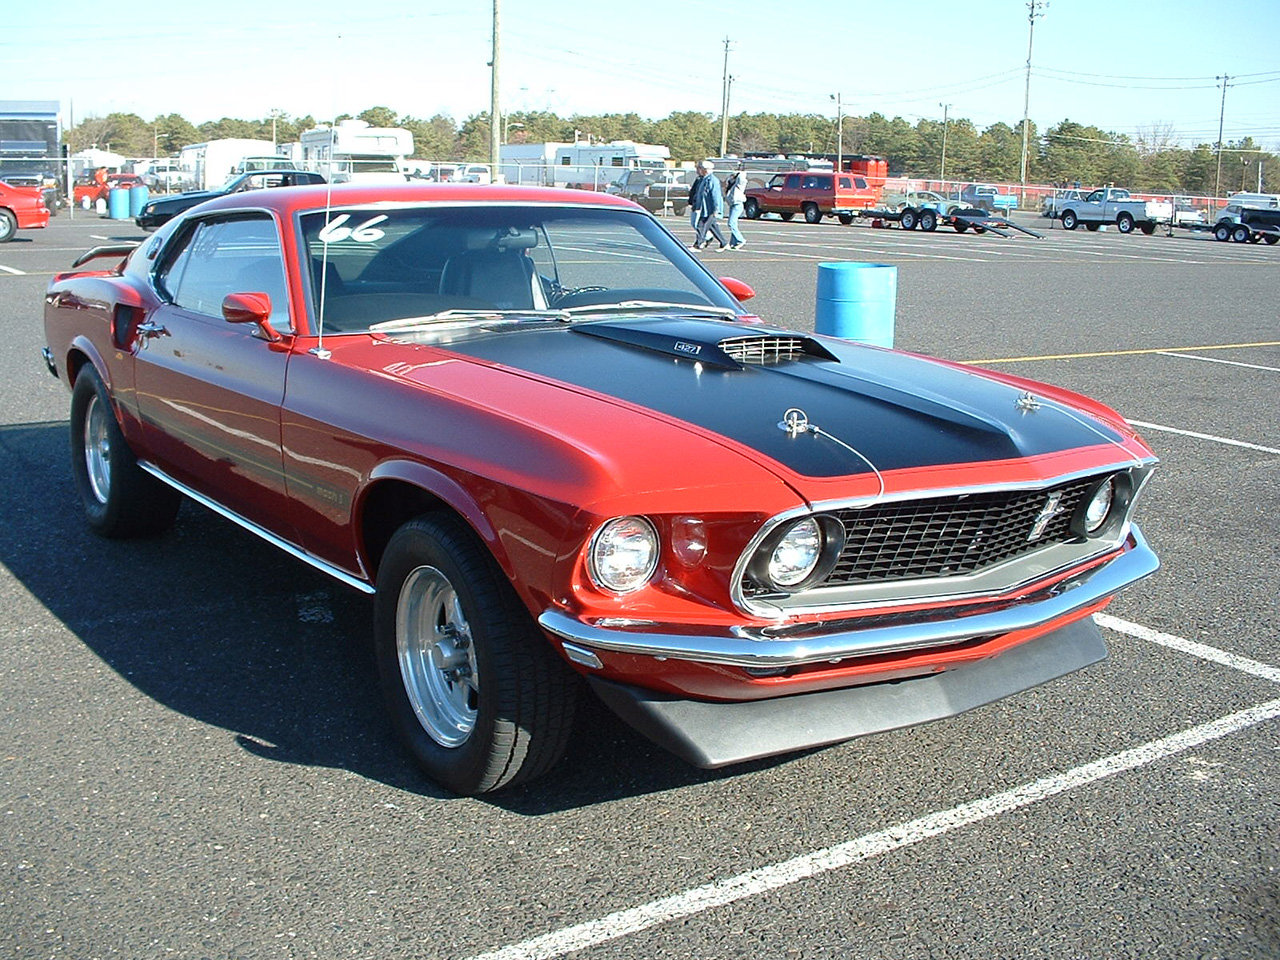 Ford Mustang Photo Gallery: 1969 Mach 1 | Shnack.com